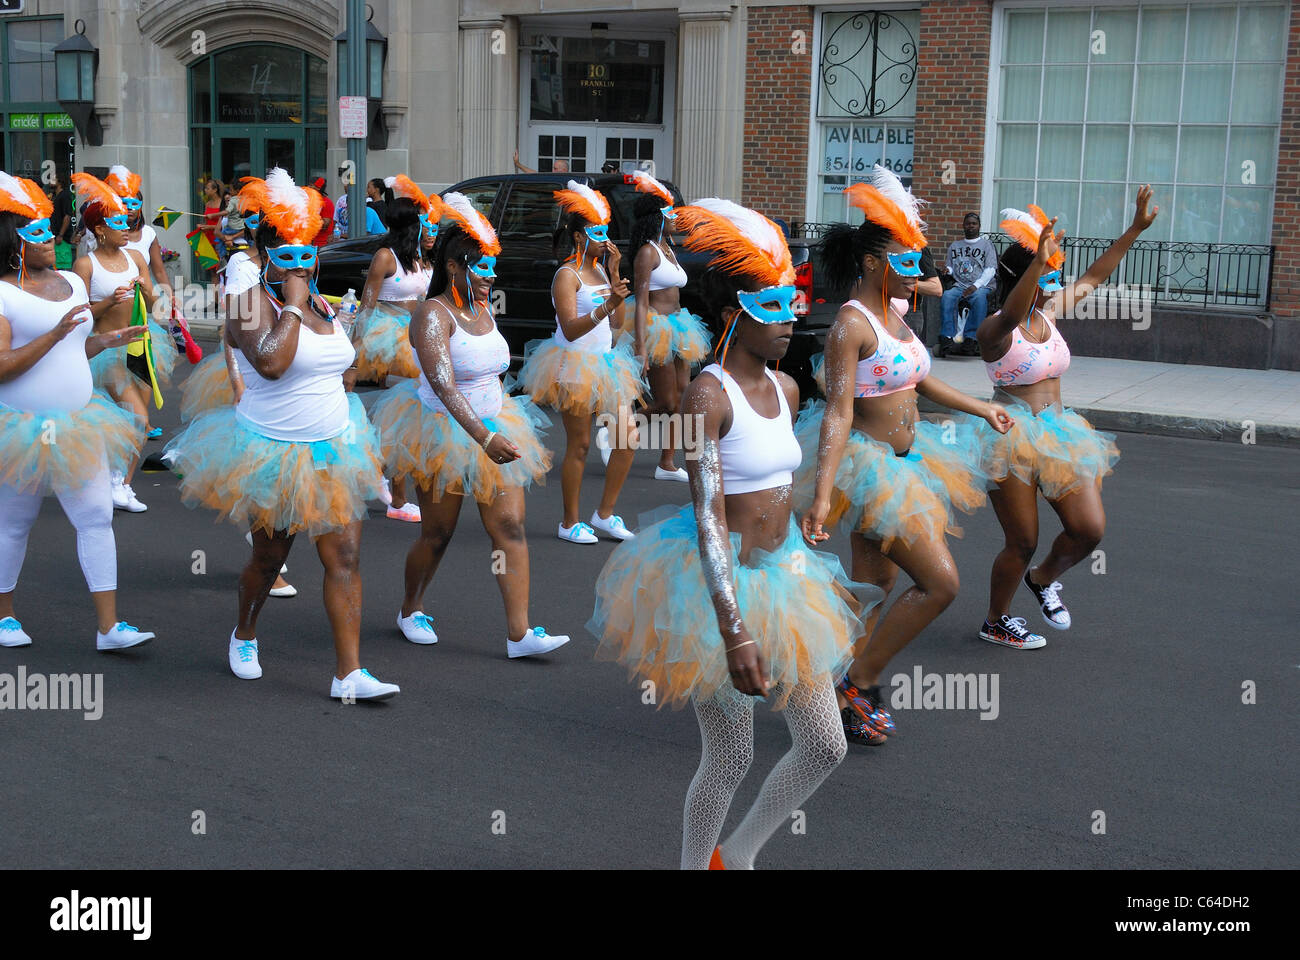 Woman's group representing Barbados march in Caribbean festival parade. Stock Photo